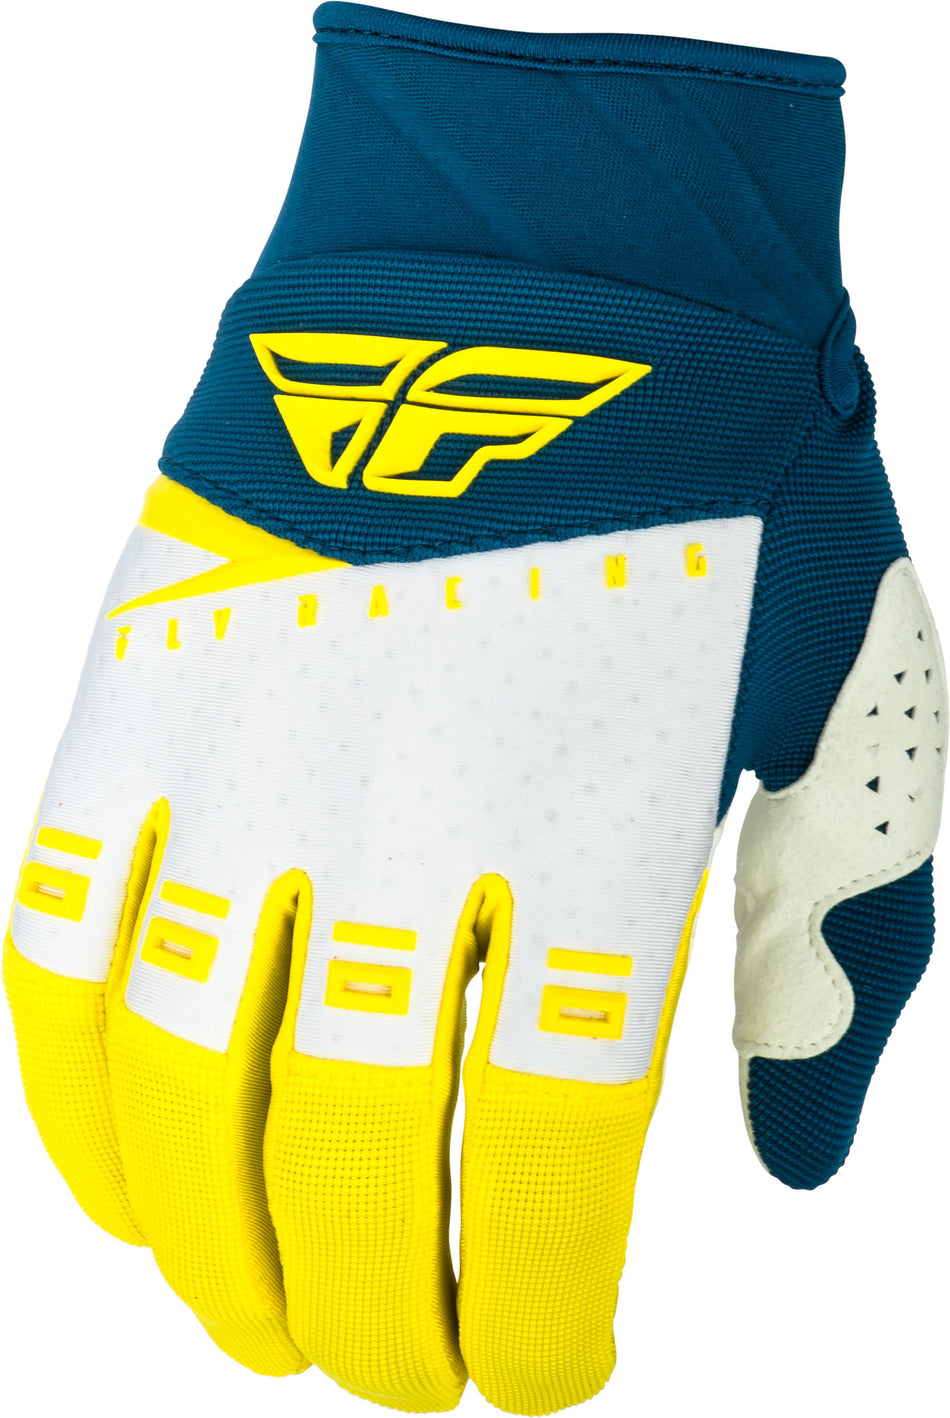 FLY RACING F-16 Gloves Yellow/White/Navy Sz 12 372-91312